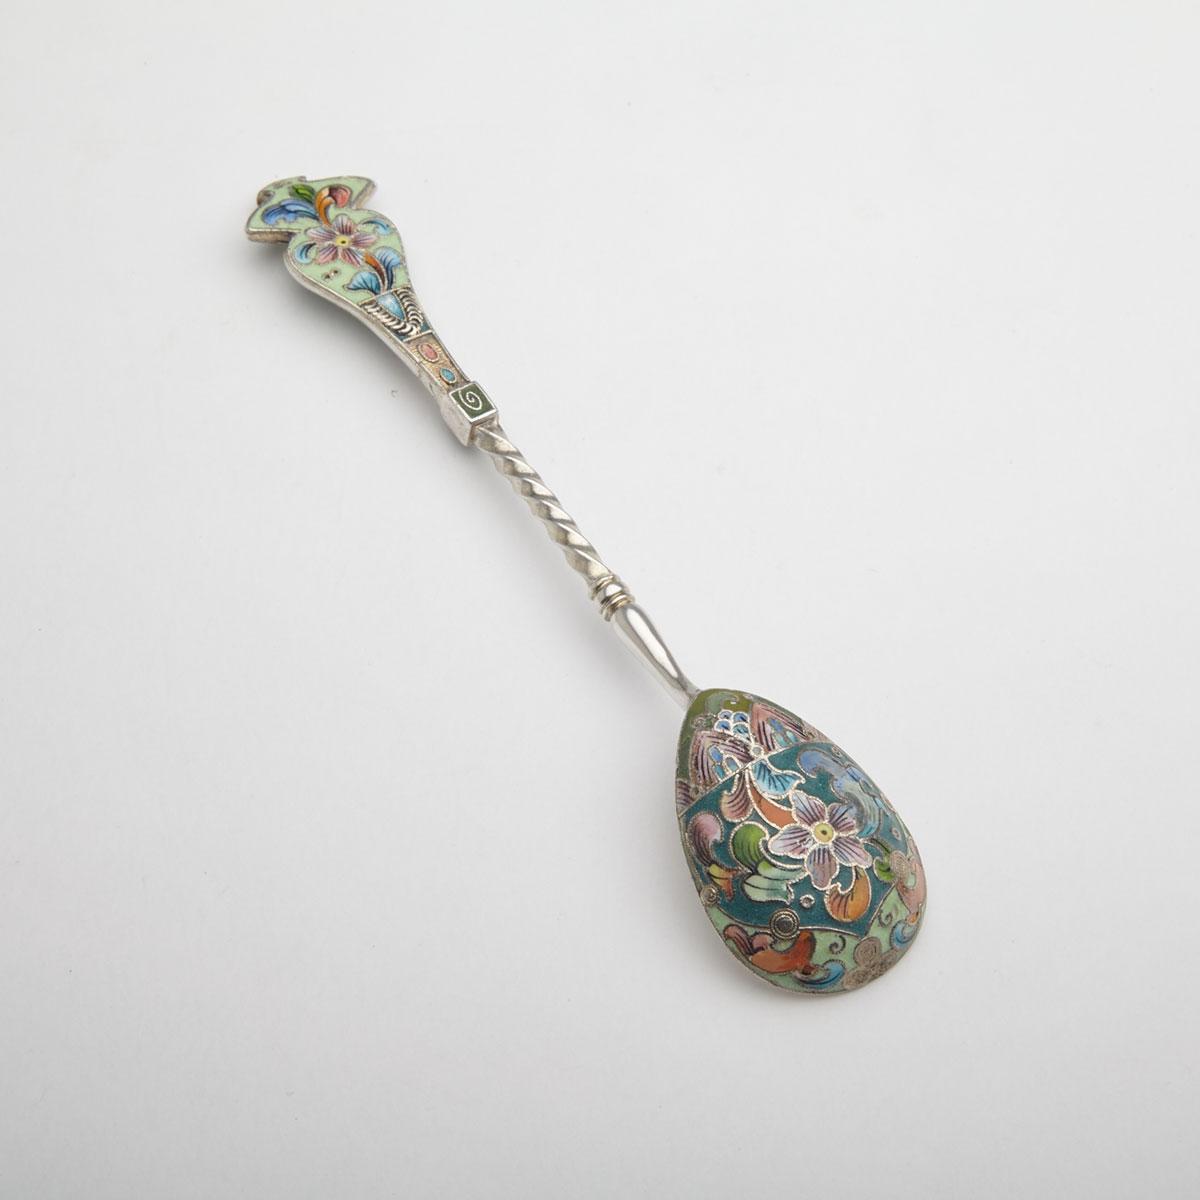 Russian Silver and Cloisonné Enamel Spoon, 6th Artel, Moscow, c.1908-17